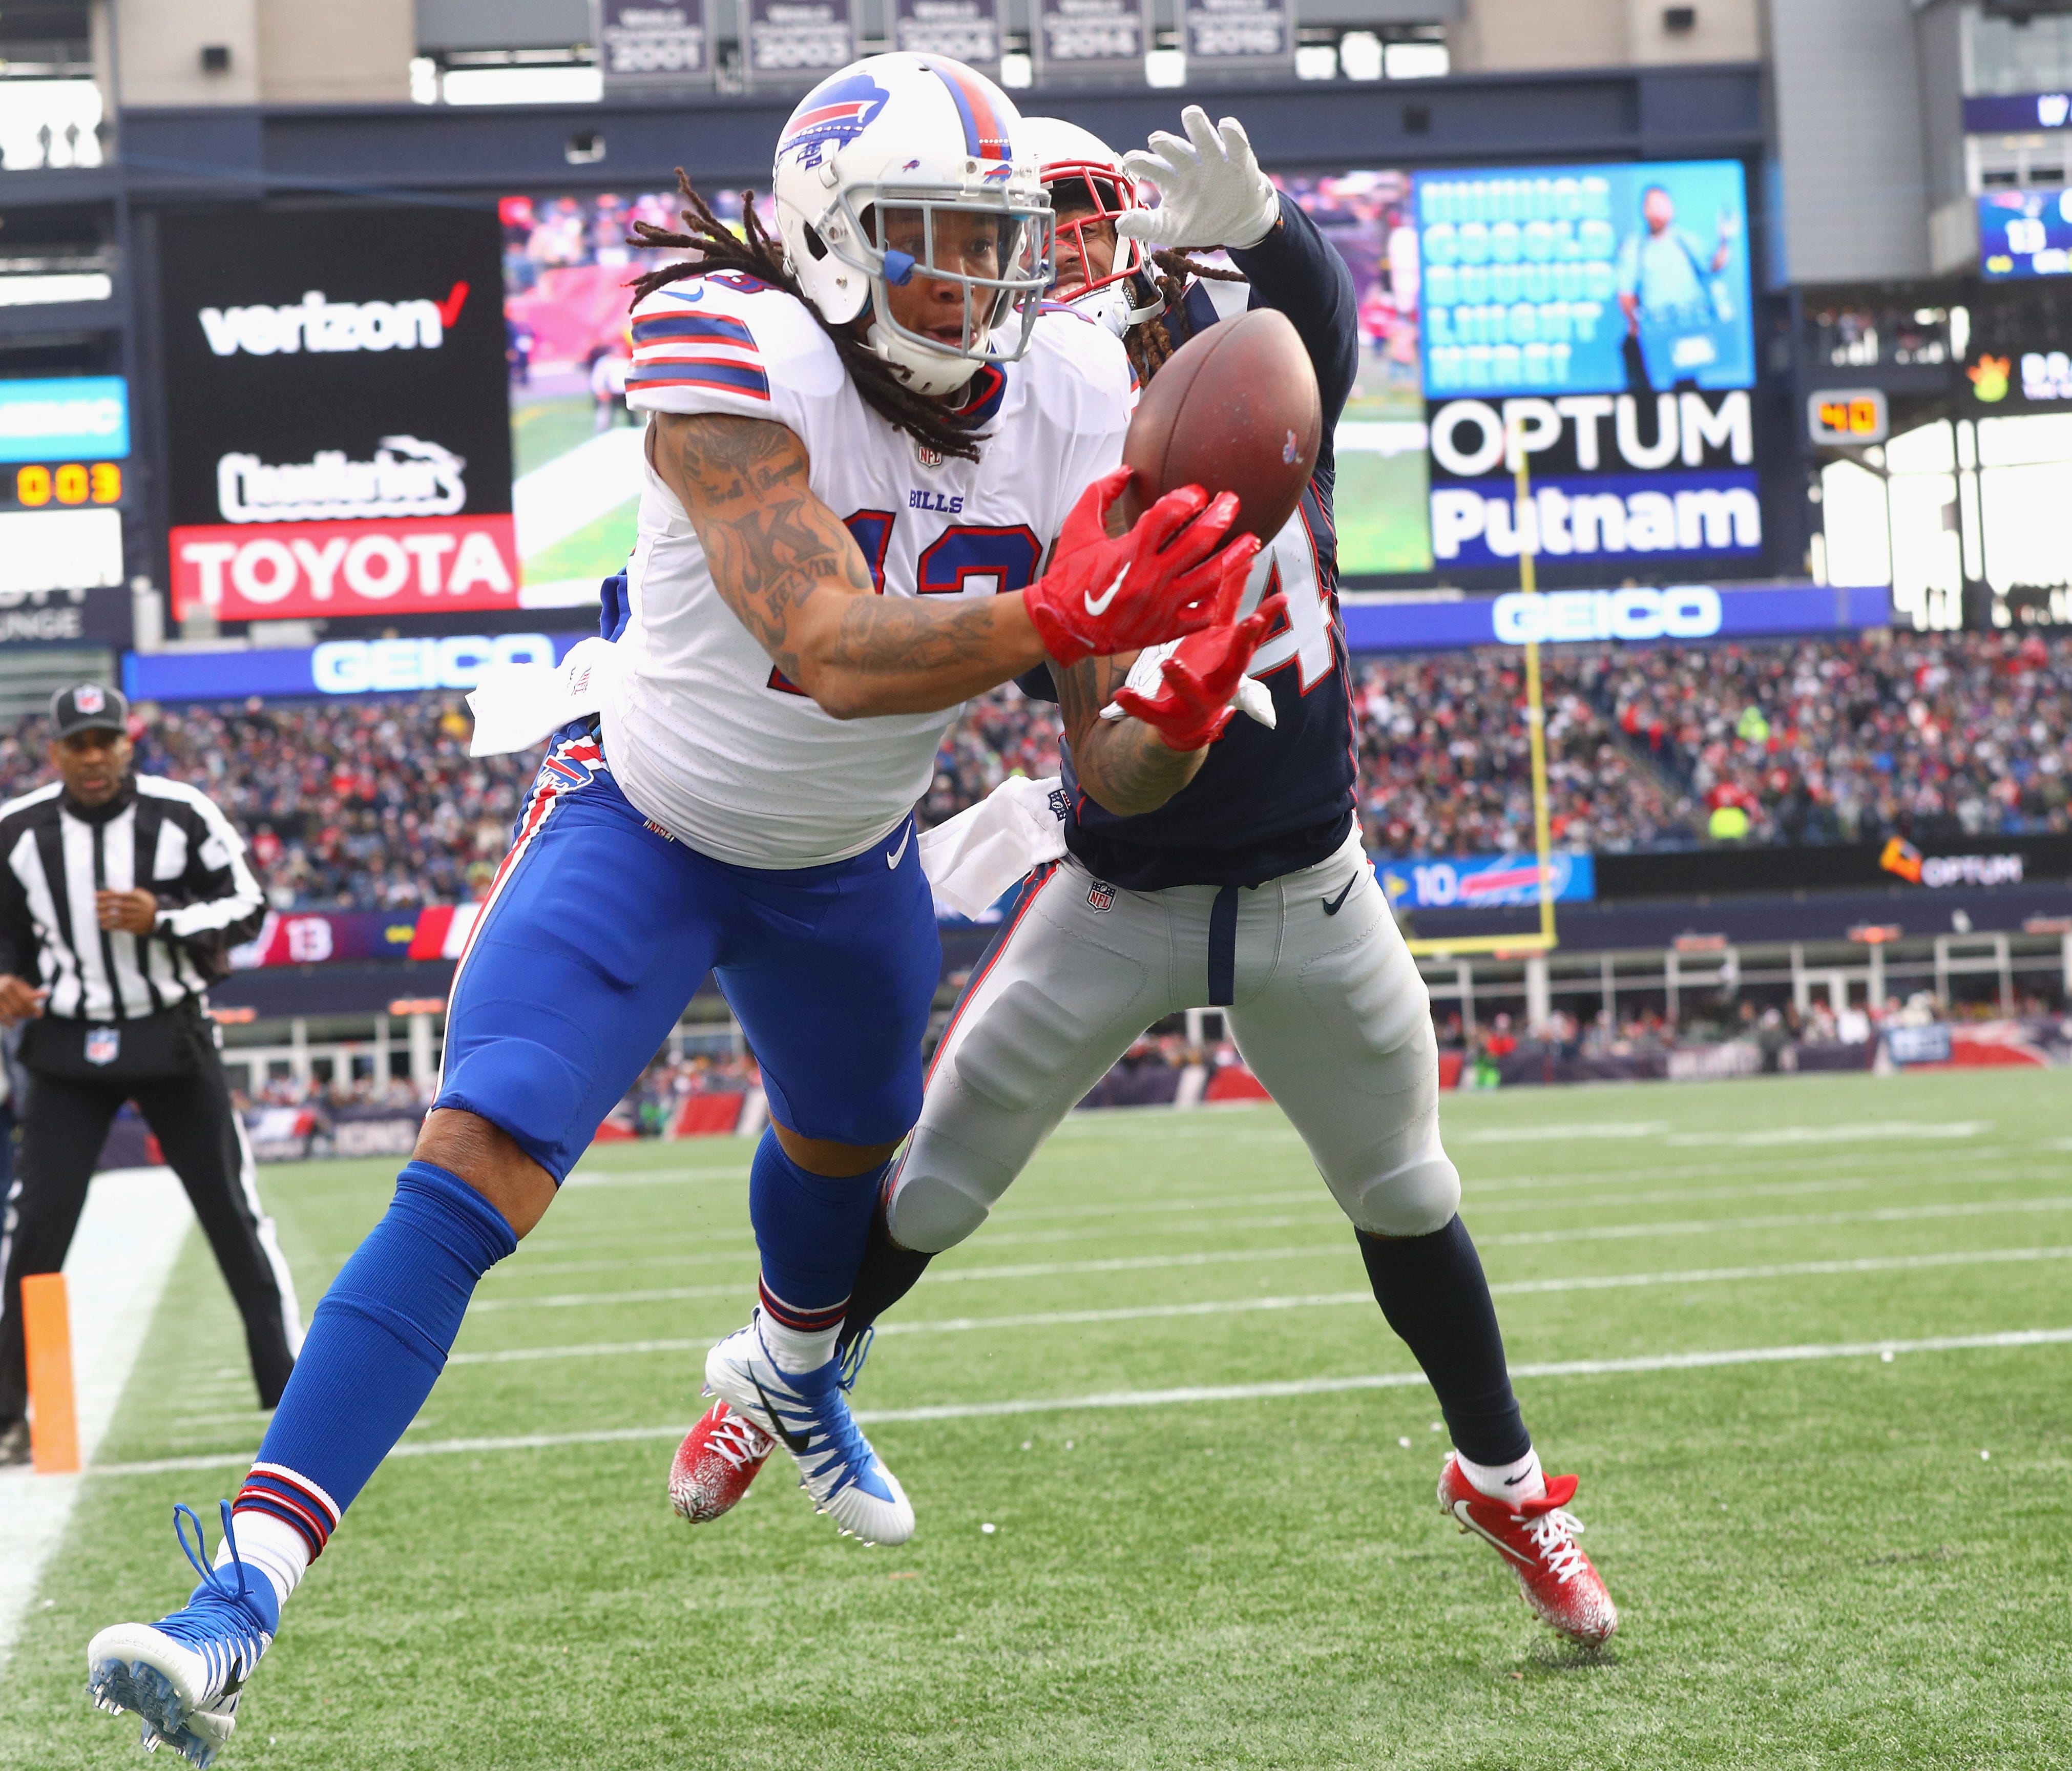 Kelvin Benjamin of the Buffalo Bills tries to catch a pass as he is defended by Stephon Gilmore #24 of the New England Patriots during the quarter of a game against the Buffalo Bills at Gillette Stadium on December 24, 2017 in Foxboro, Massachusetts.